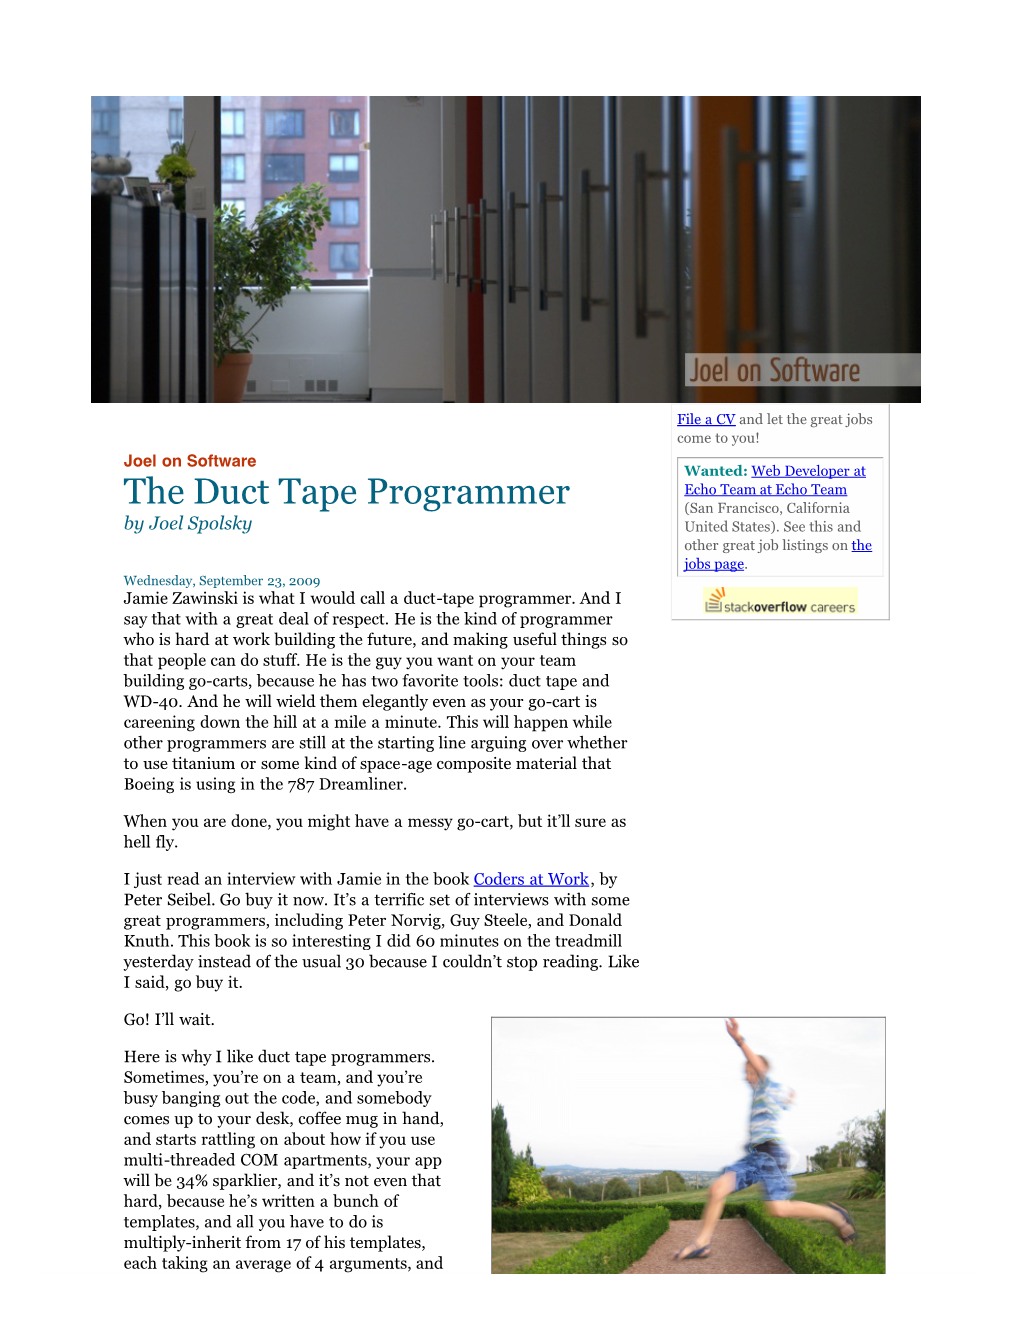 The Duct Tape Programmer (San Francisco, California by Joel Spolsky United States)